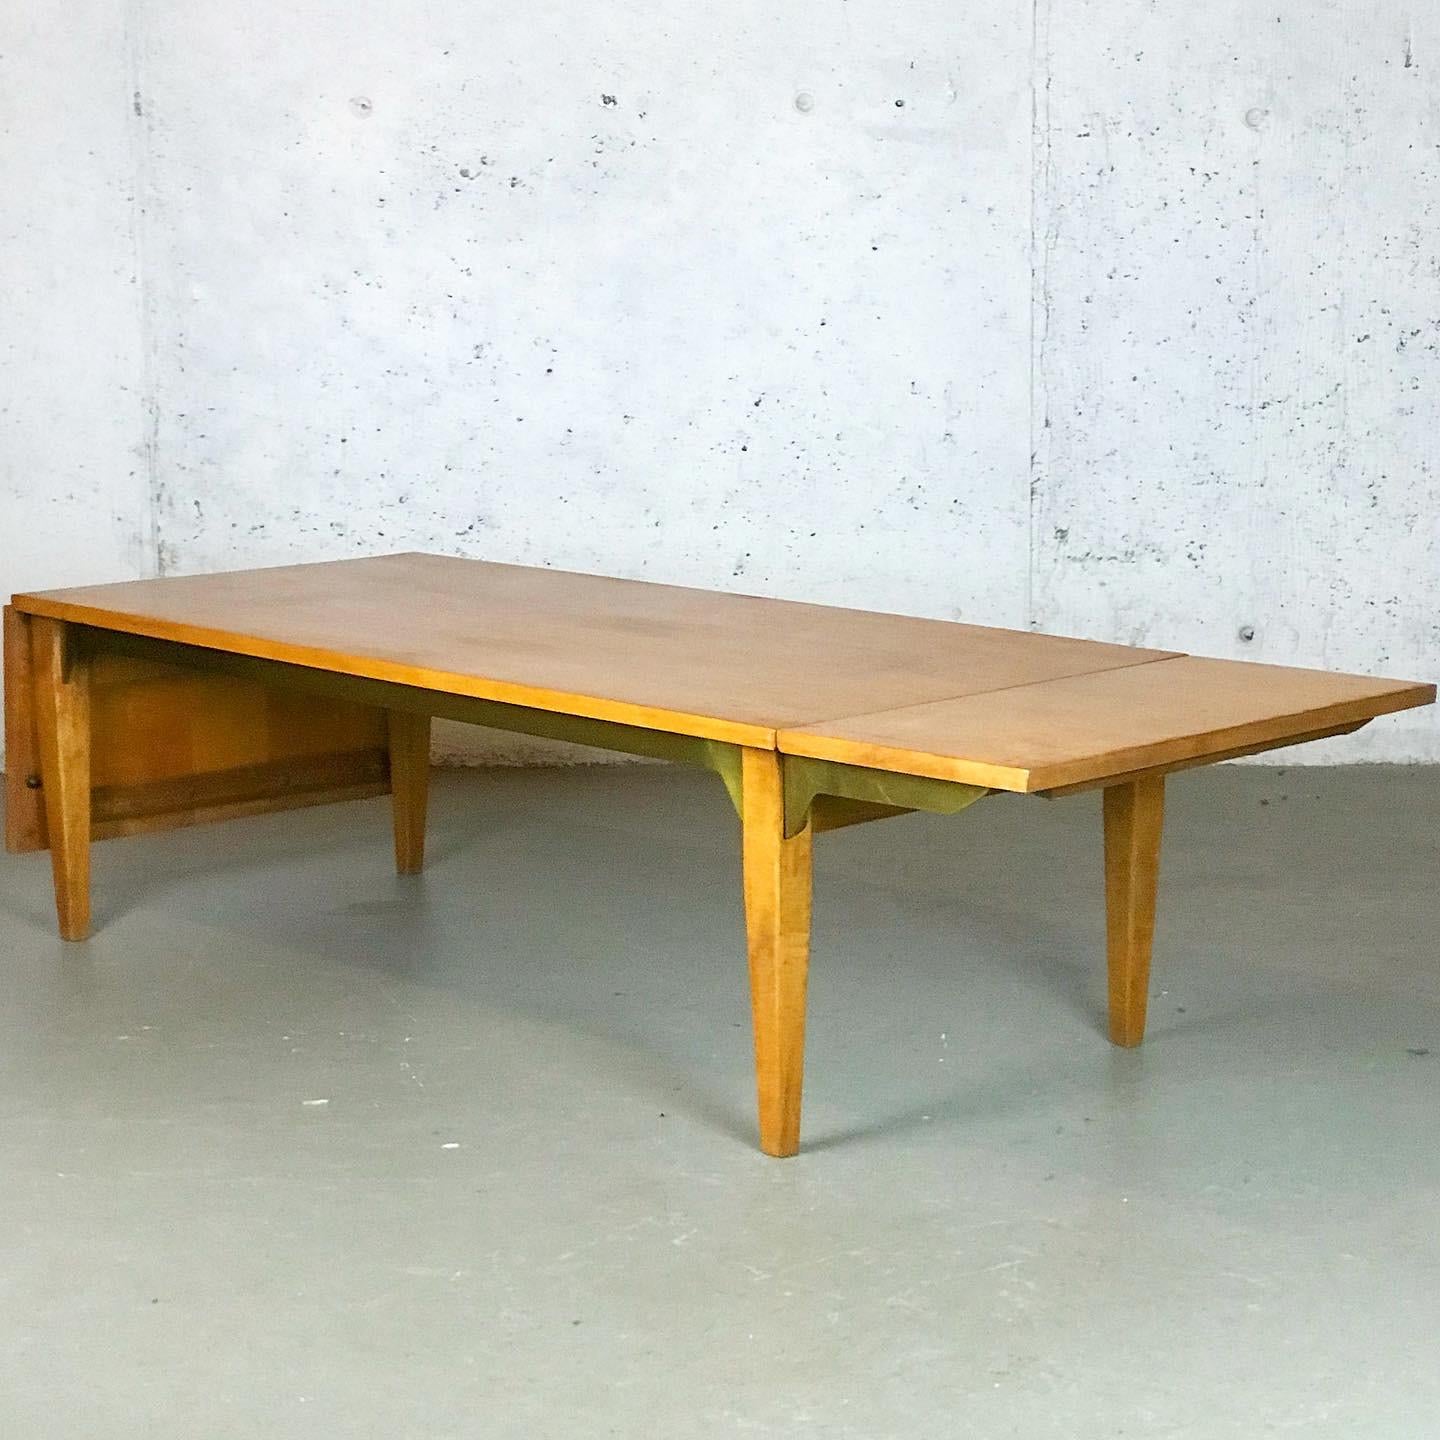 Mid Century Modern Coffee Table or Bench by Milo Baughman for Murray 1953 In Good Condition For Sale In Framingham, MA